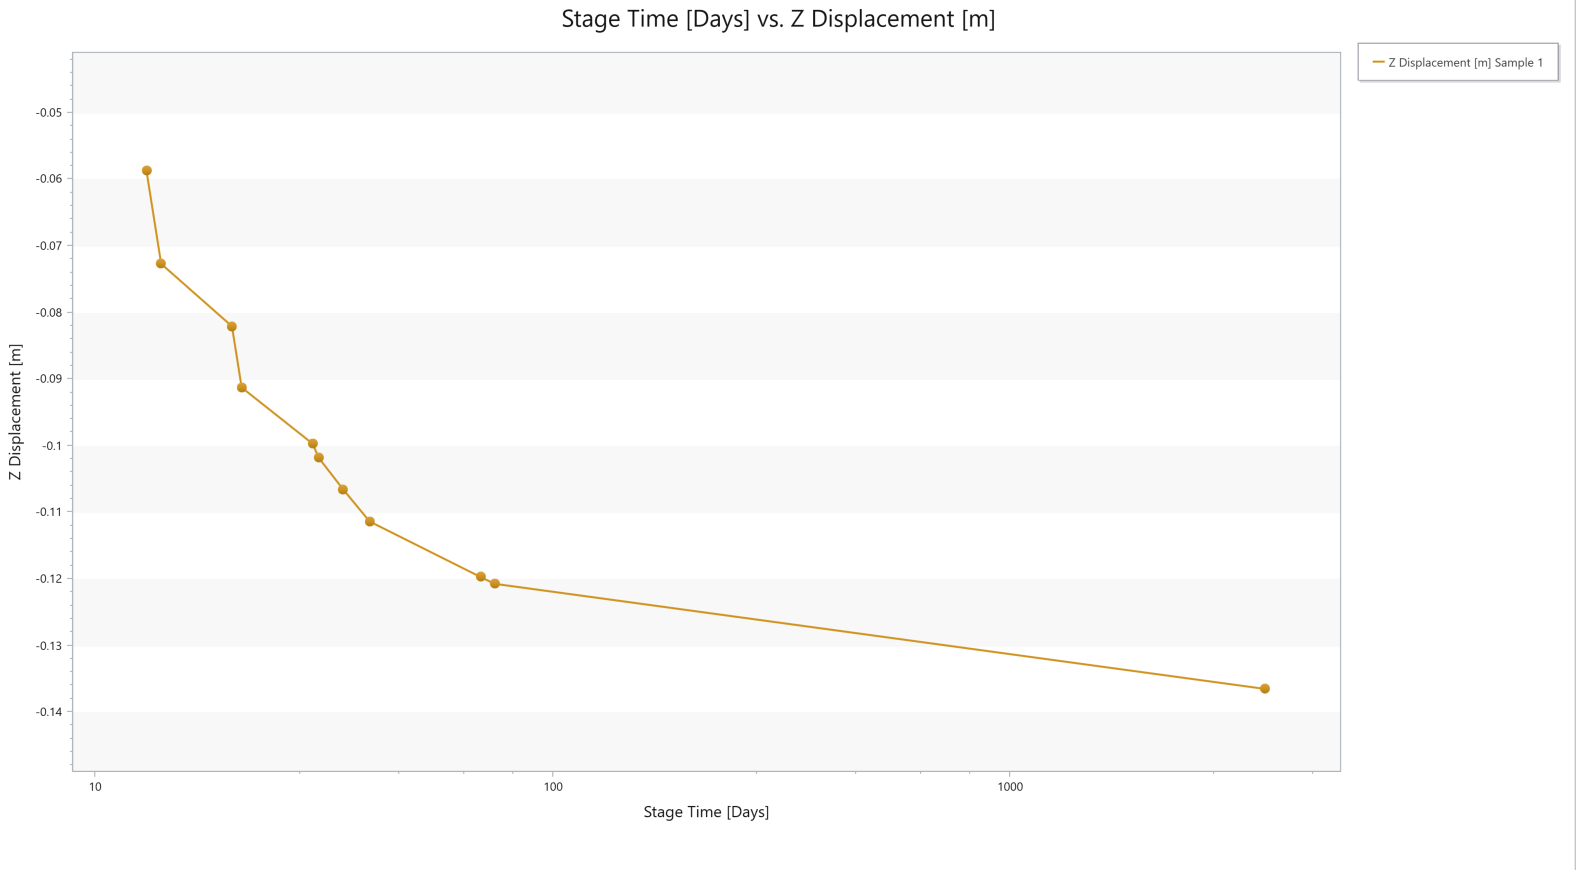 Stage Time [Days] - Z Displacement [m] graph